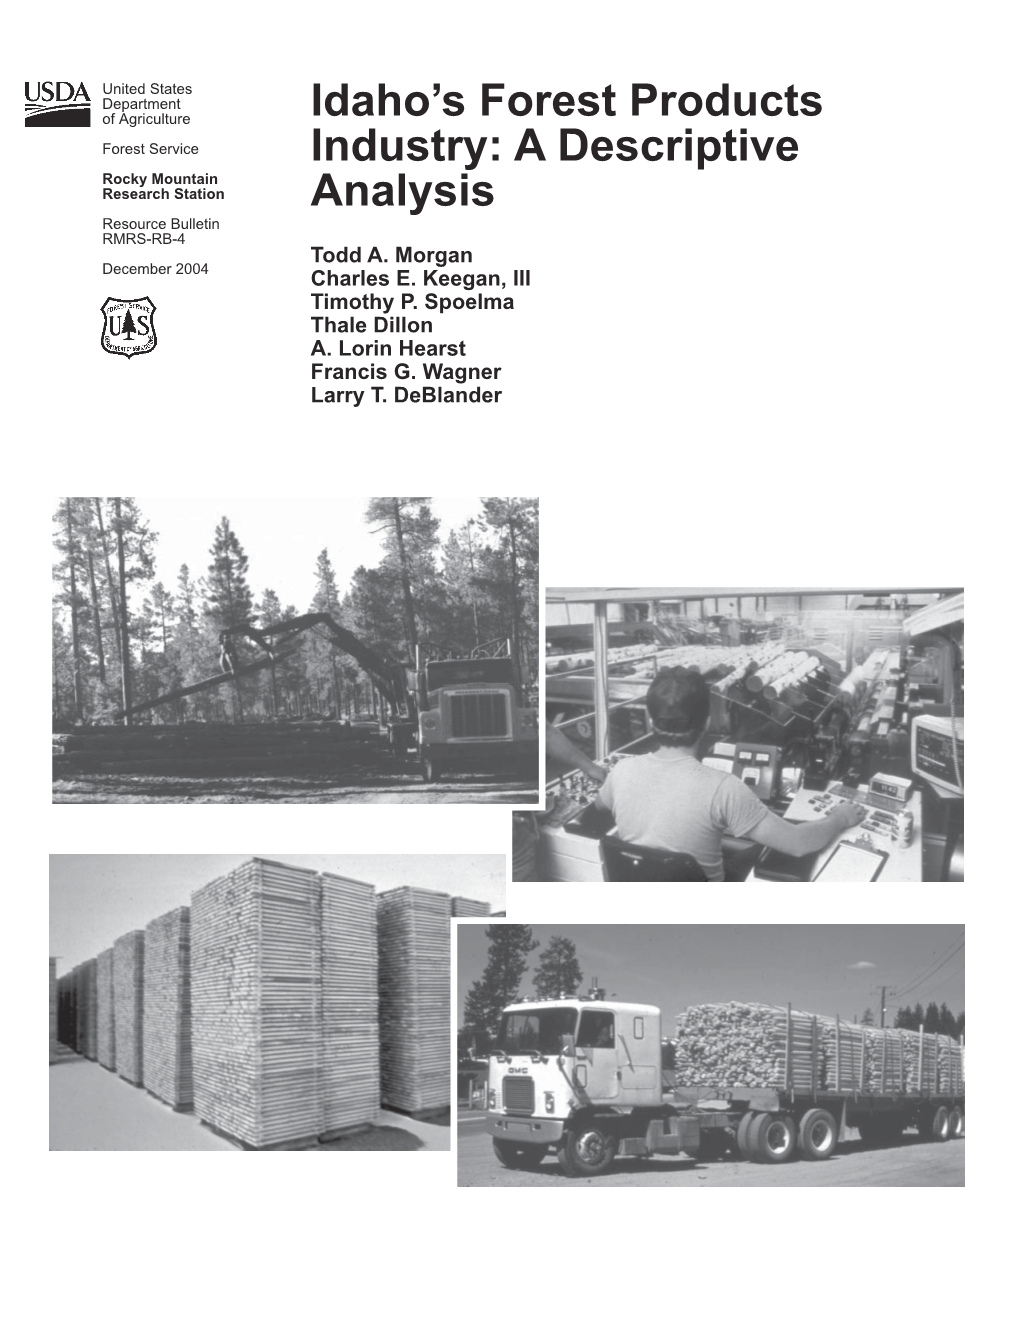 Idaho's Forest Products Industry: a Descriptive Analysis